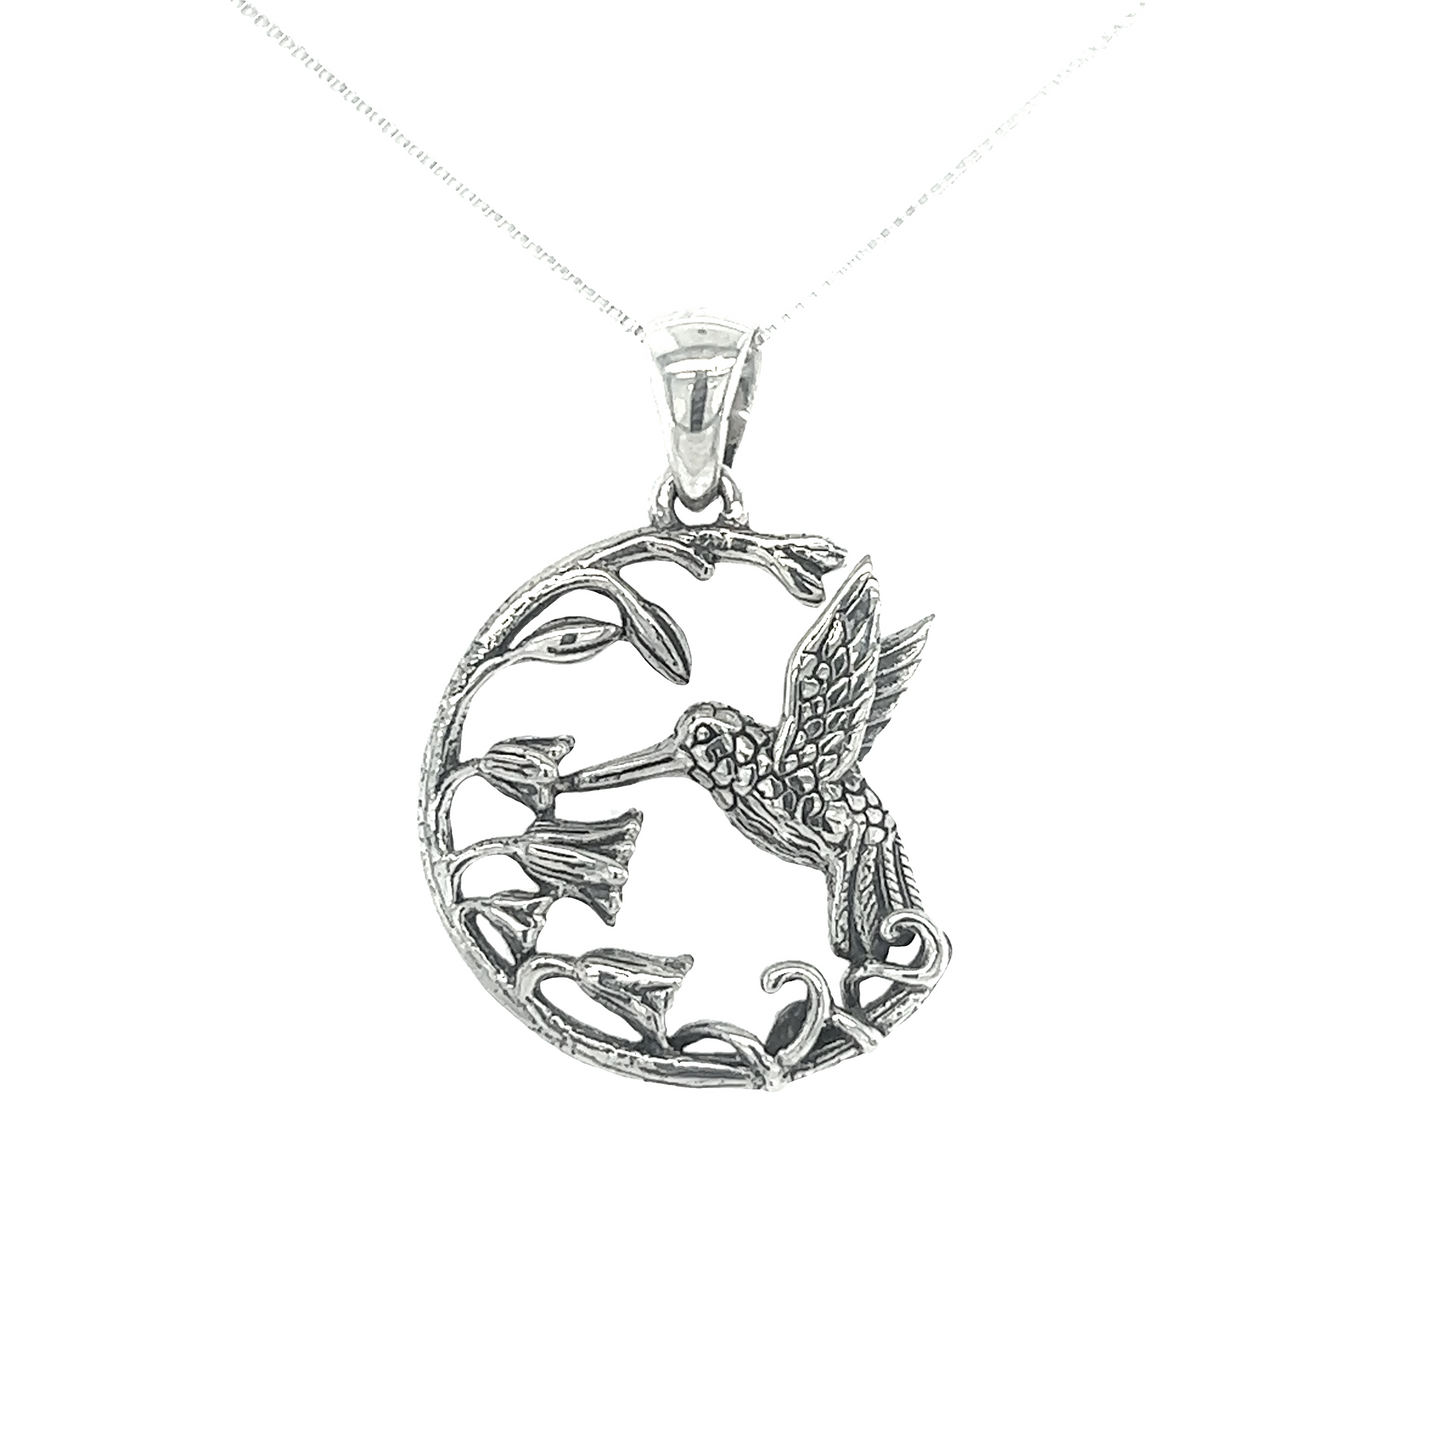 A Super Silver Floral Hummingbird Pendant, crafted with .925 sterling silver, showcases nature's sweetest secret.